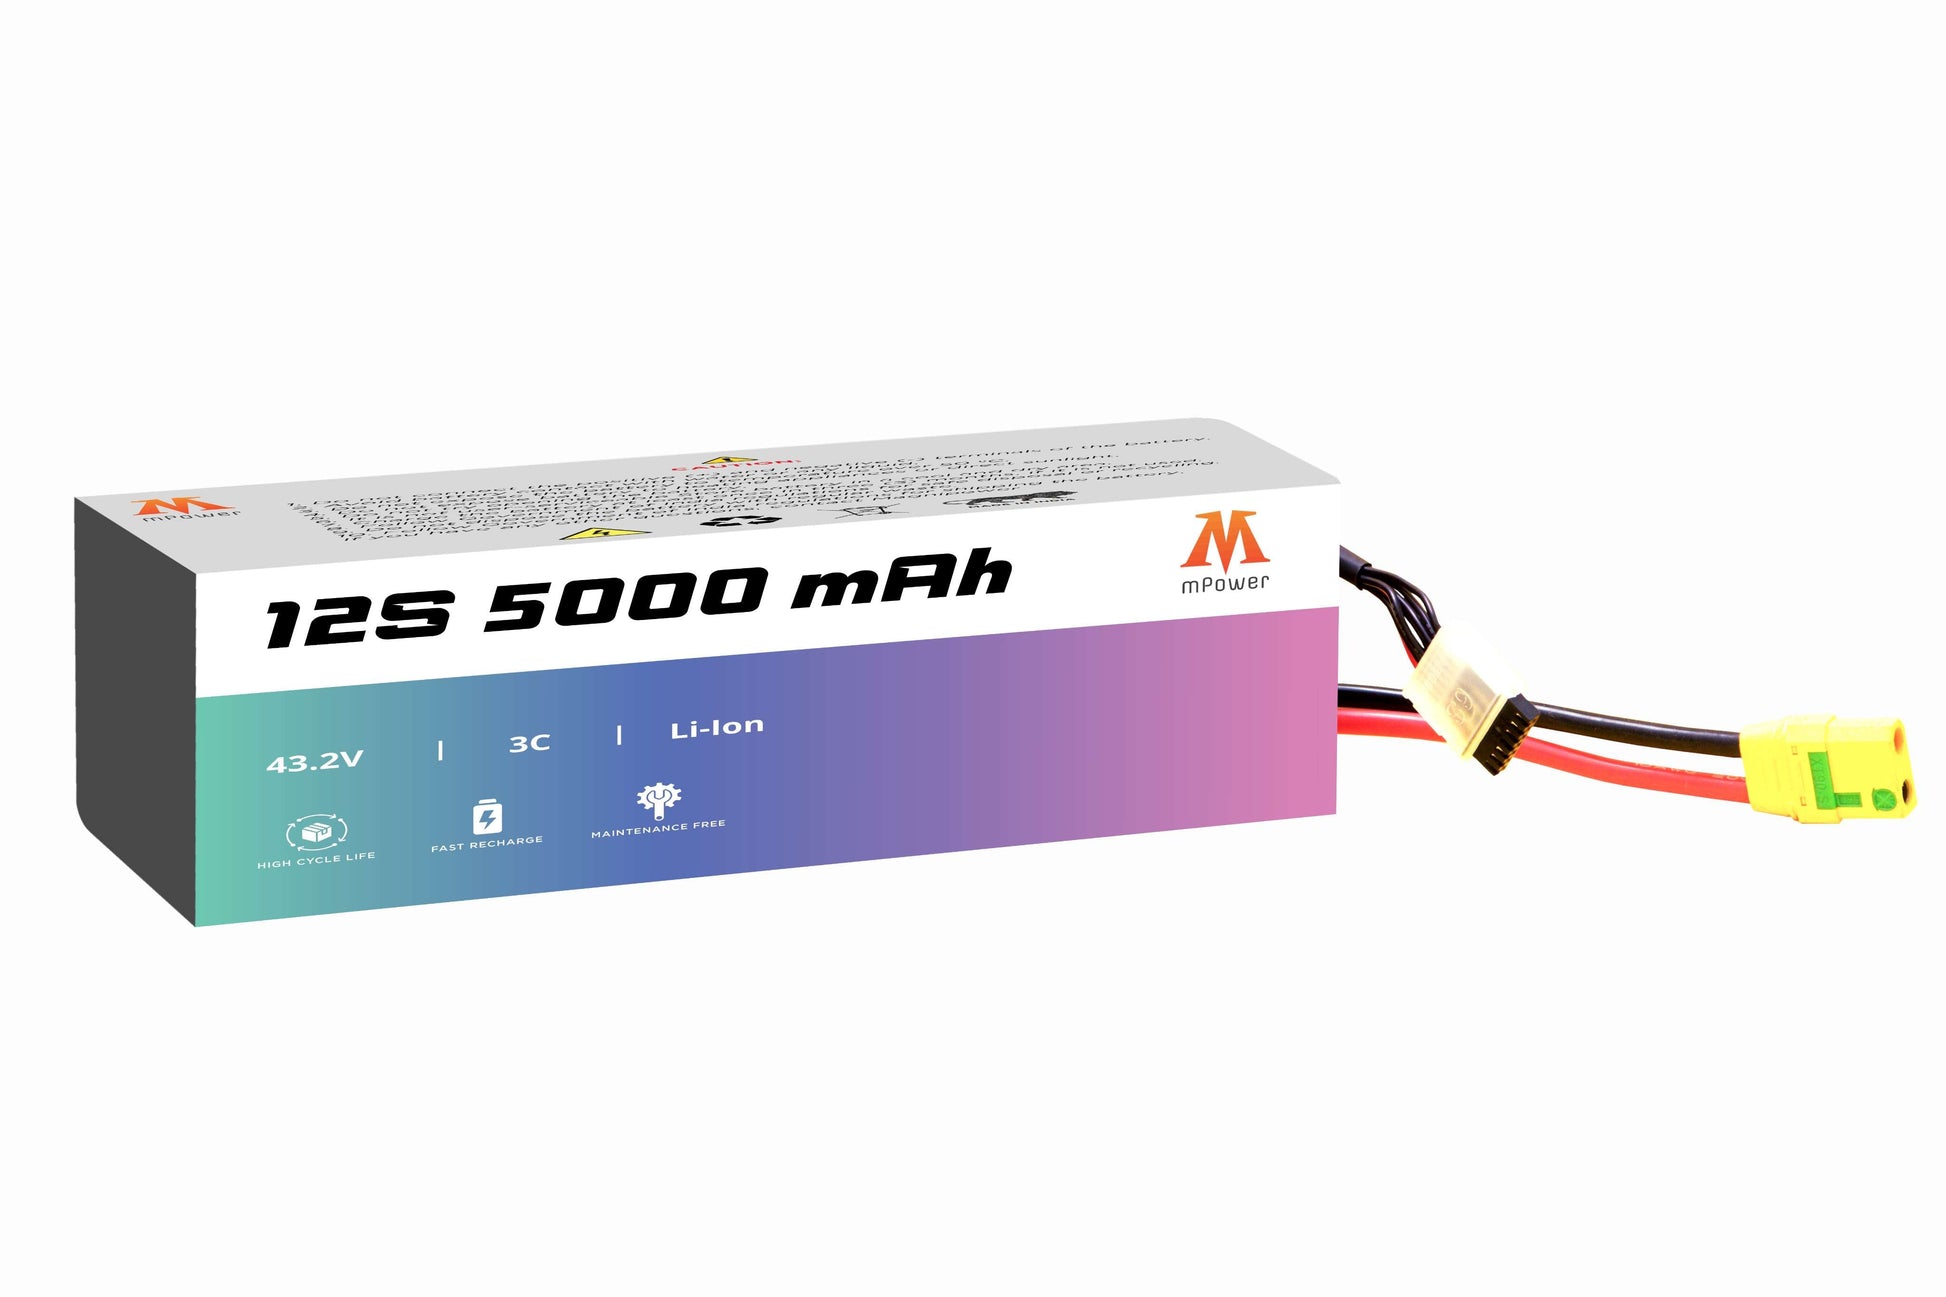 mPower 12S 5000mAh Lithium-Ion Battery for Survey Drones-mpowerlithium